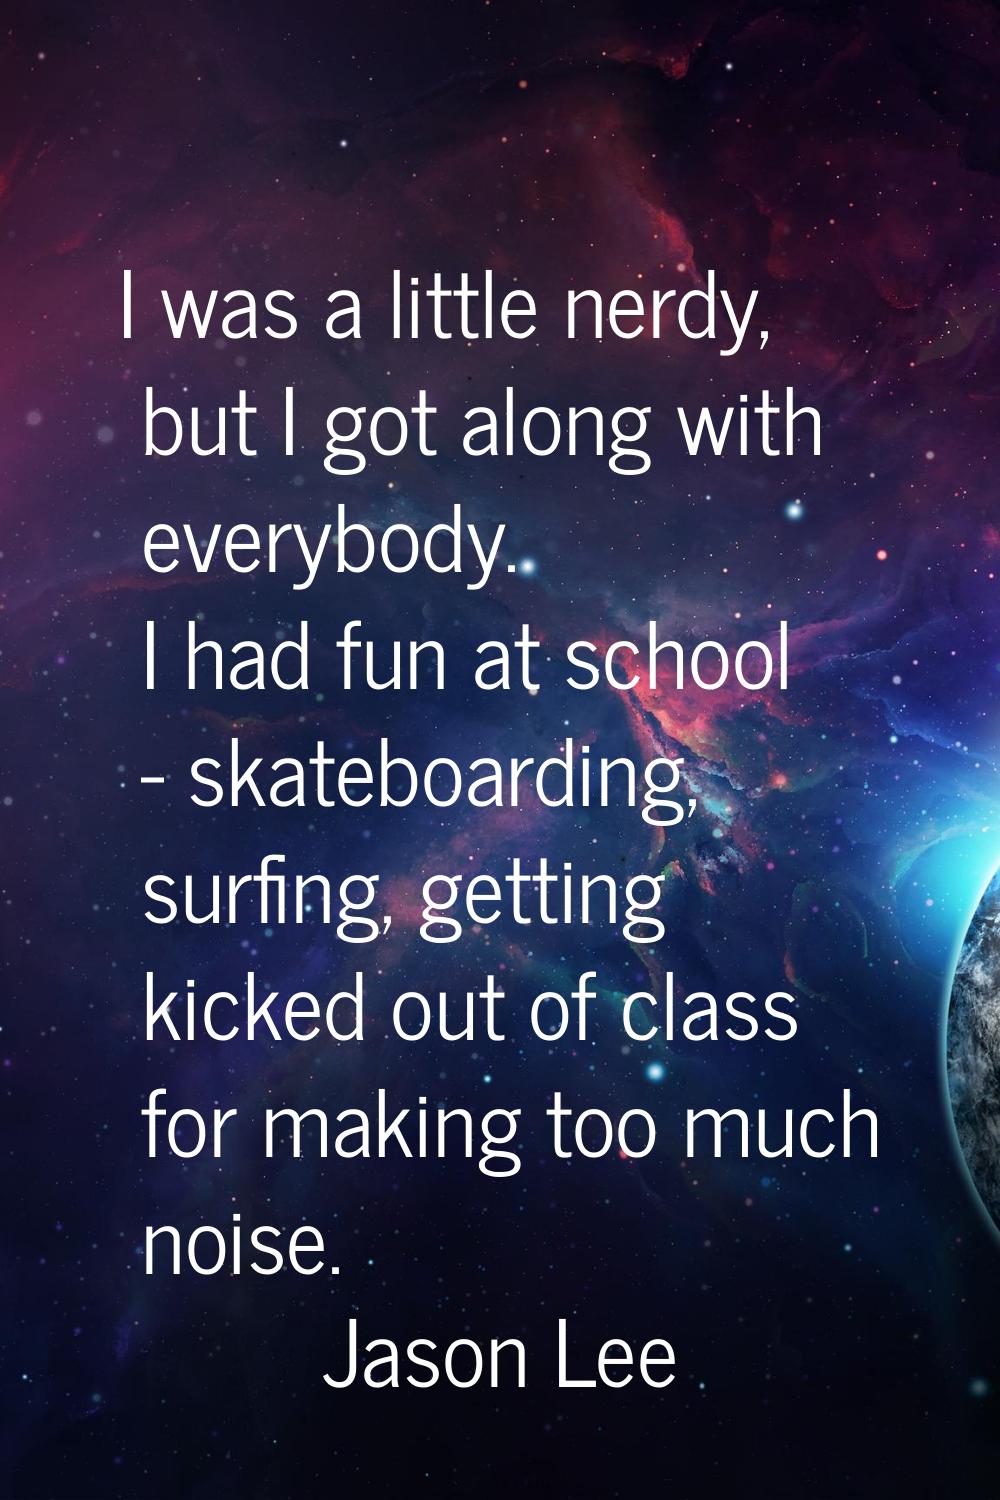 I was a little nerdy, but I got along with everybody. I had fun at school - skateboarding, surfing,